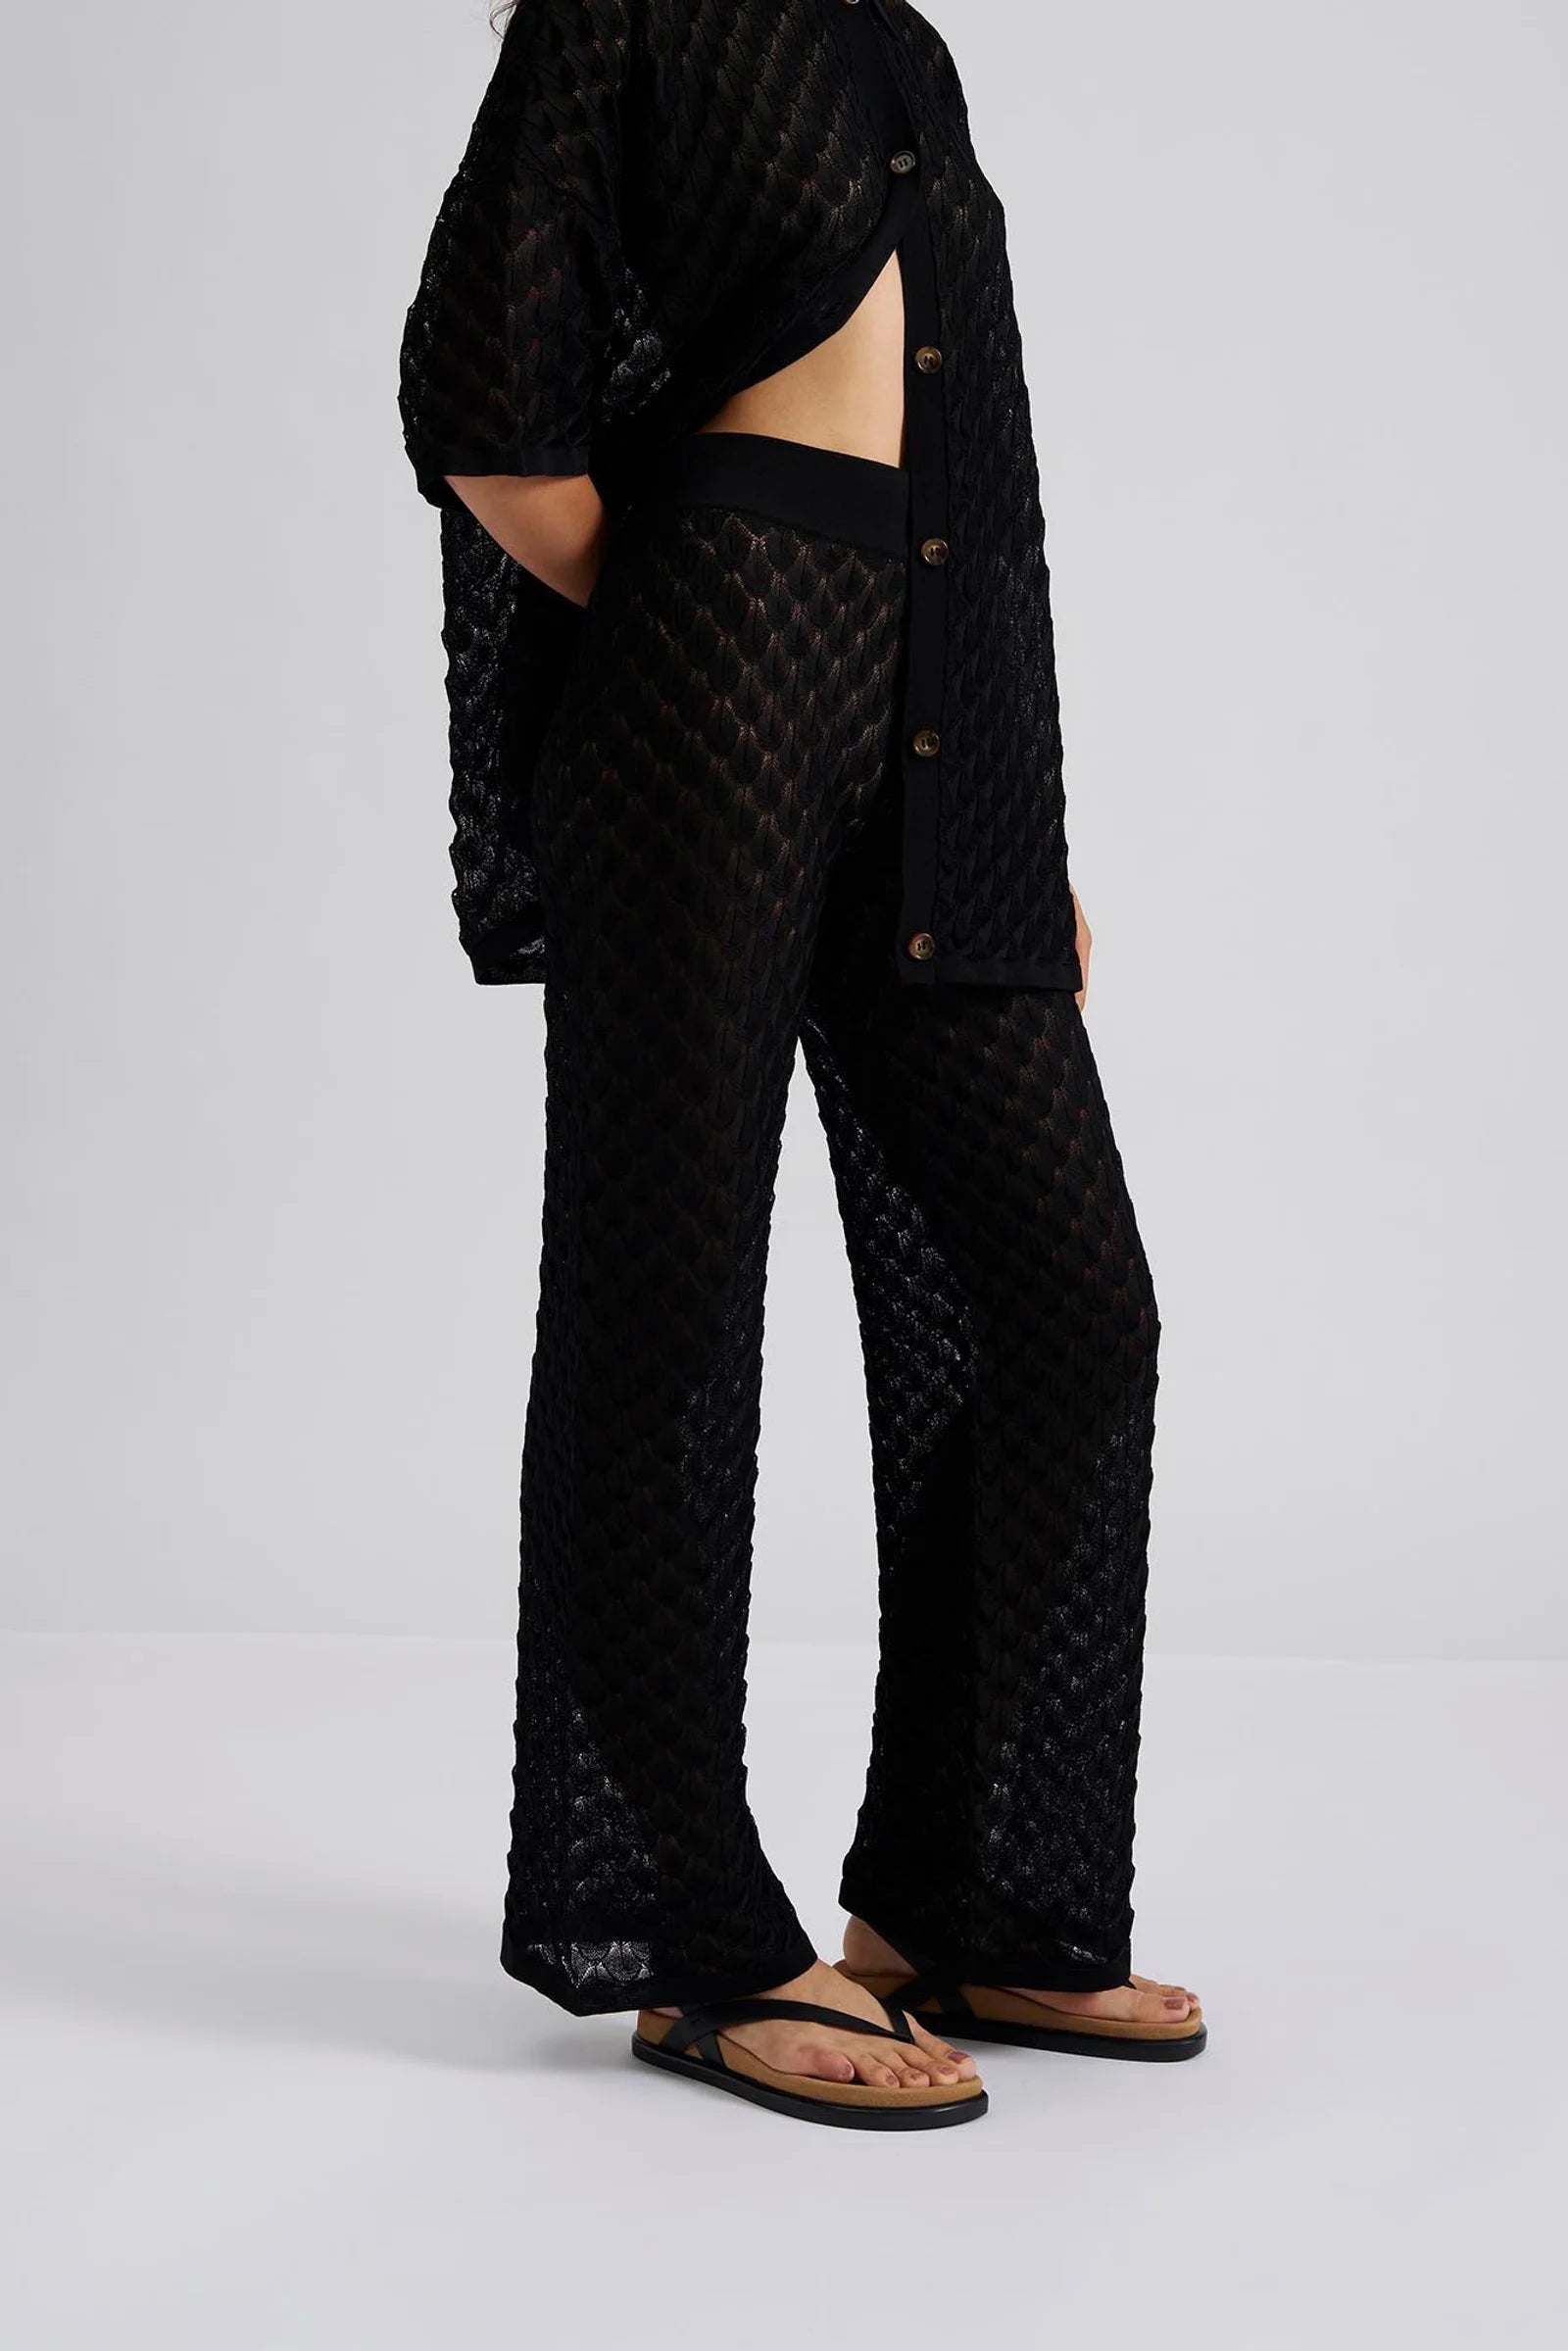 Alissa Knitted Pants Black